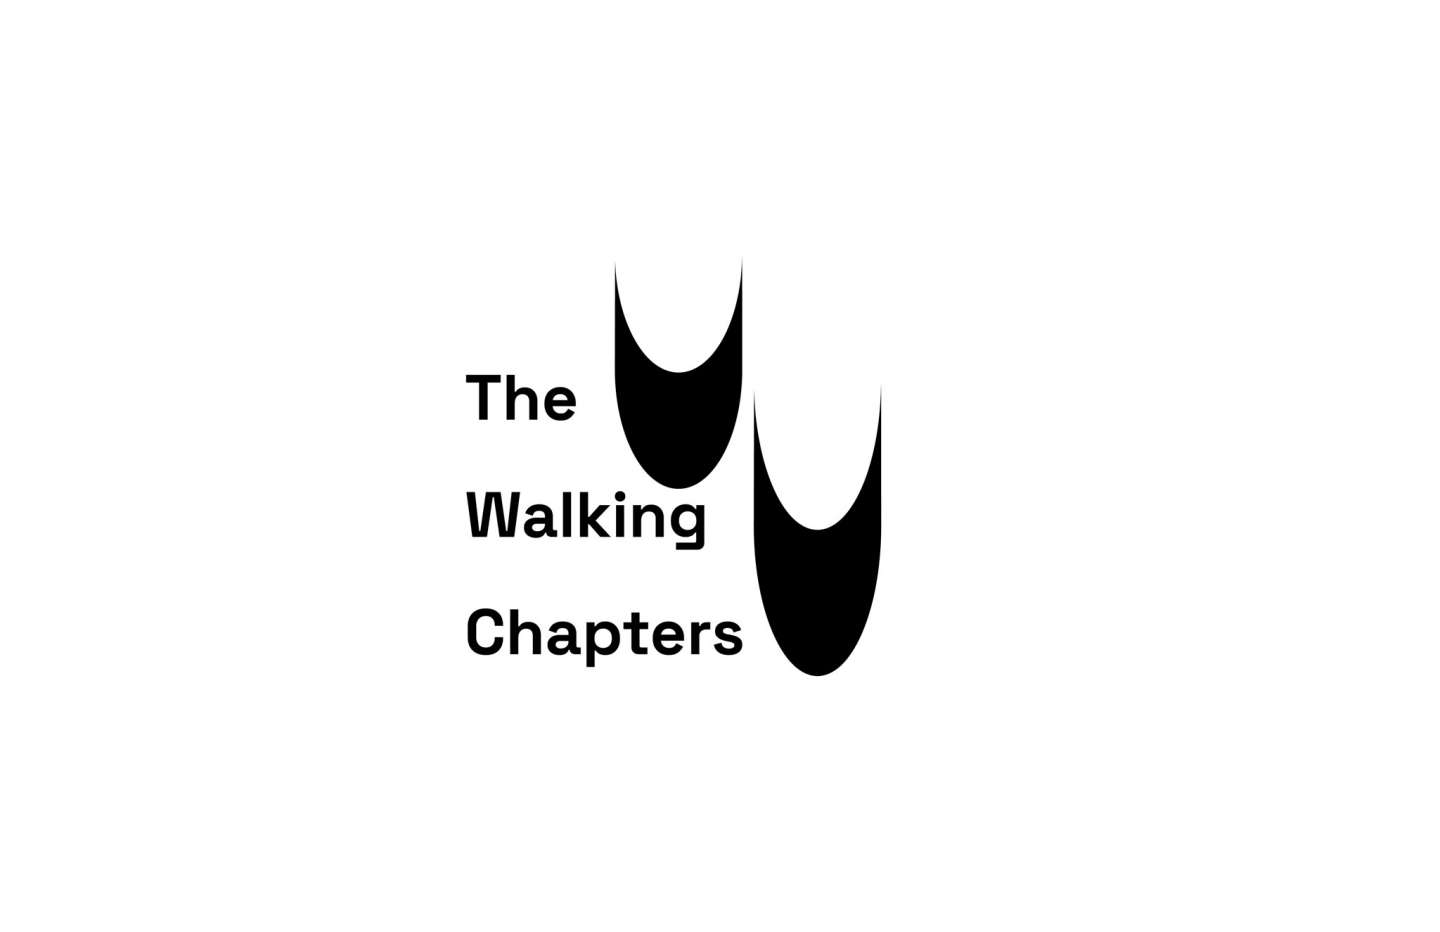 The Walking Chapters